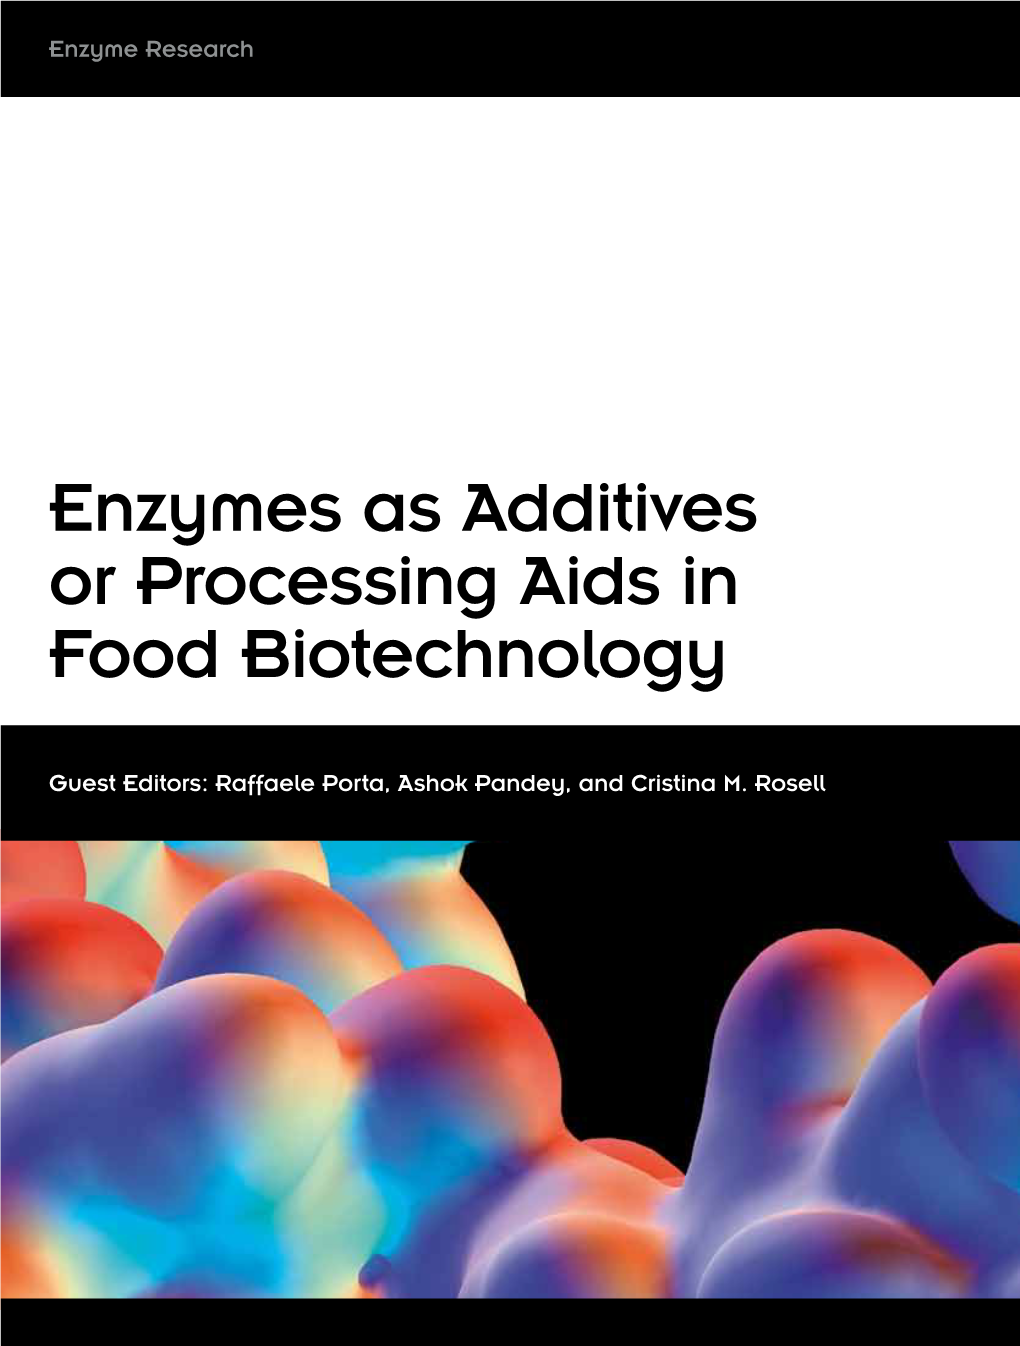 Enzymes As Additives Or Processing Aids in Food Biotechnology